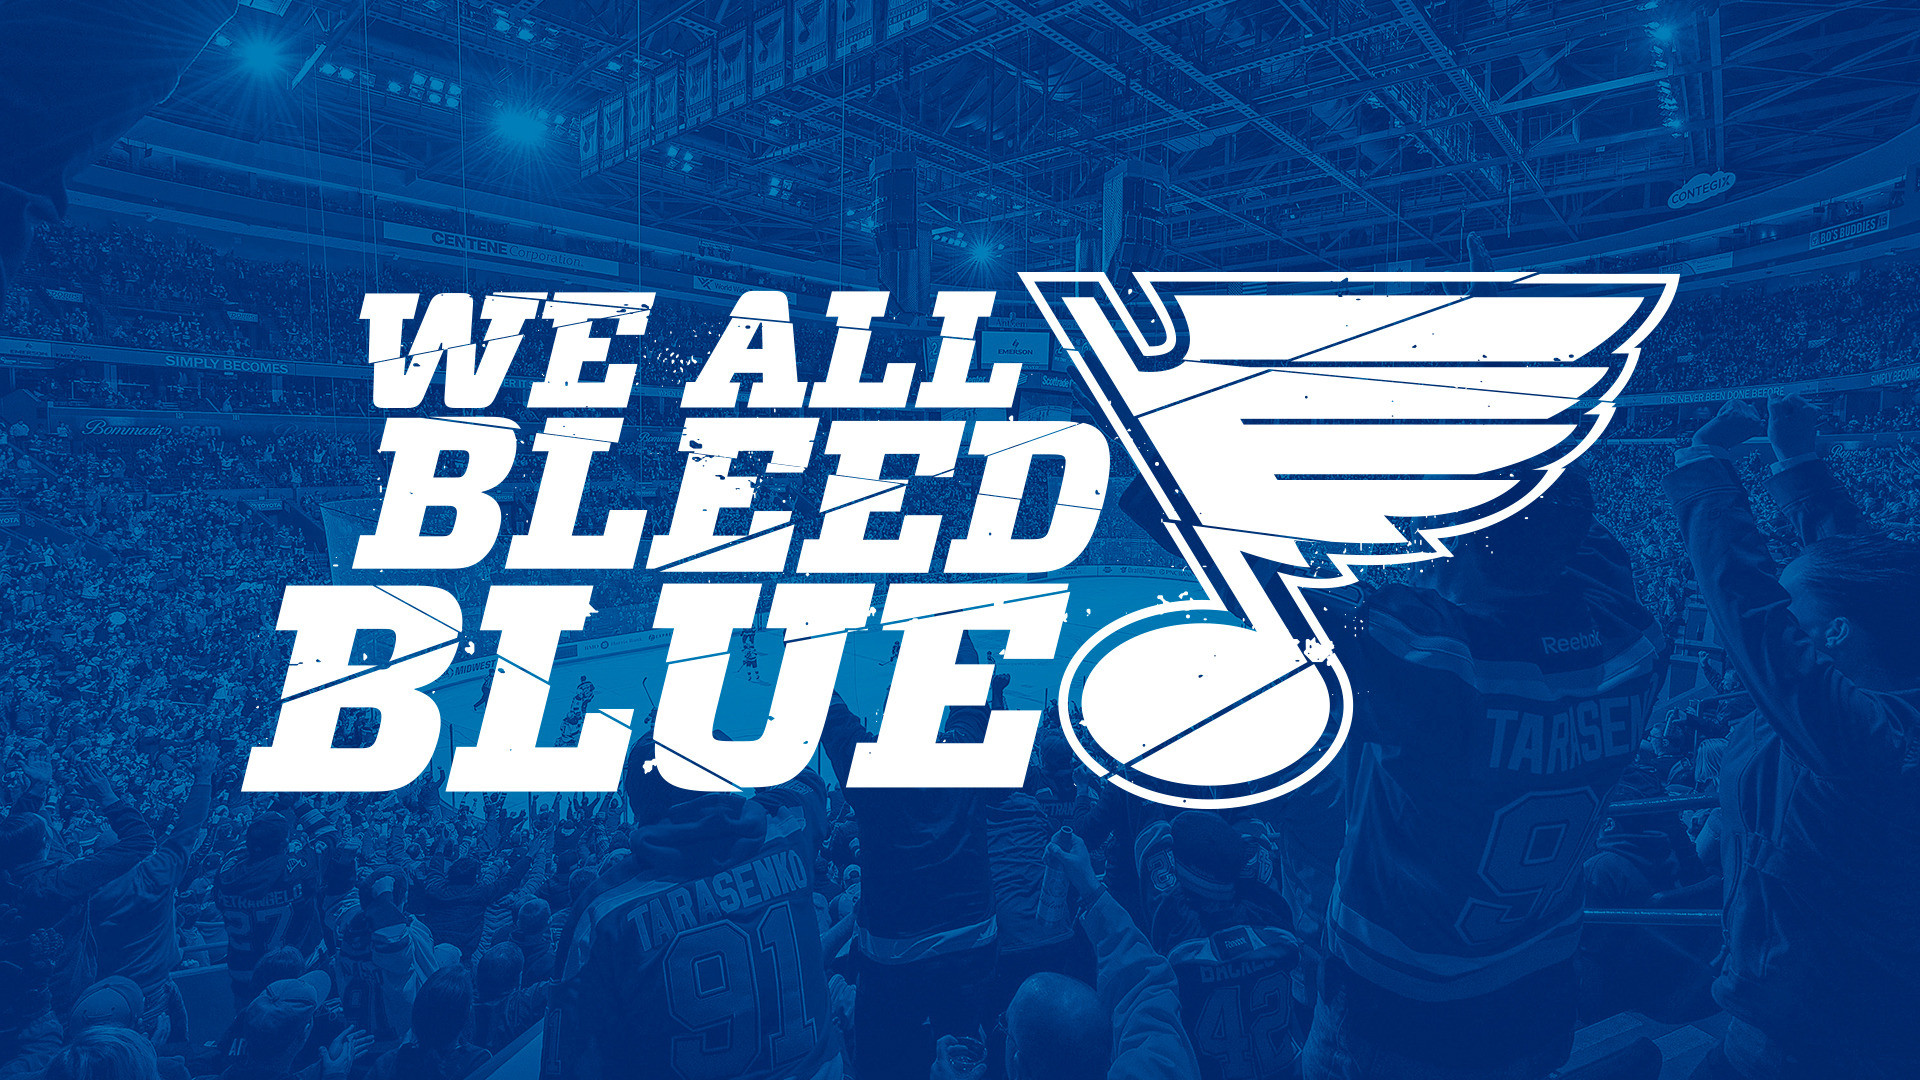 1920x1080 St Louis Blues Schedule Wallpaper in HQ Resolution - HD Wallpapers